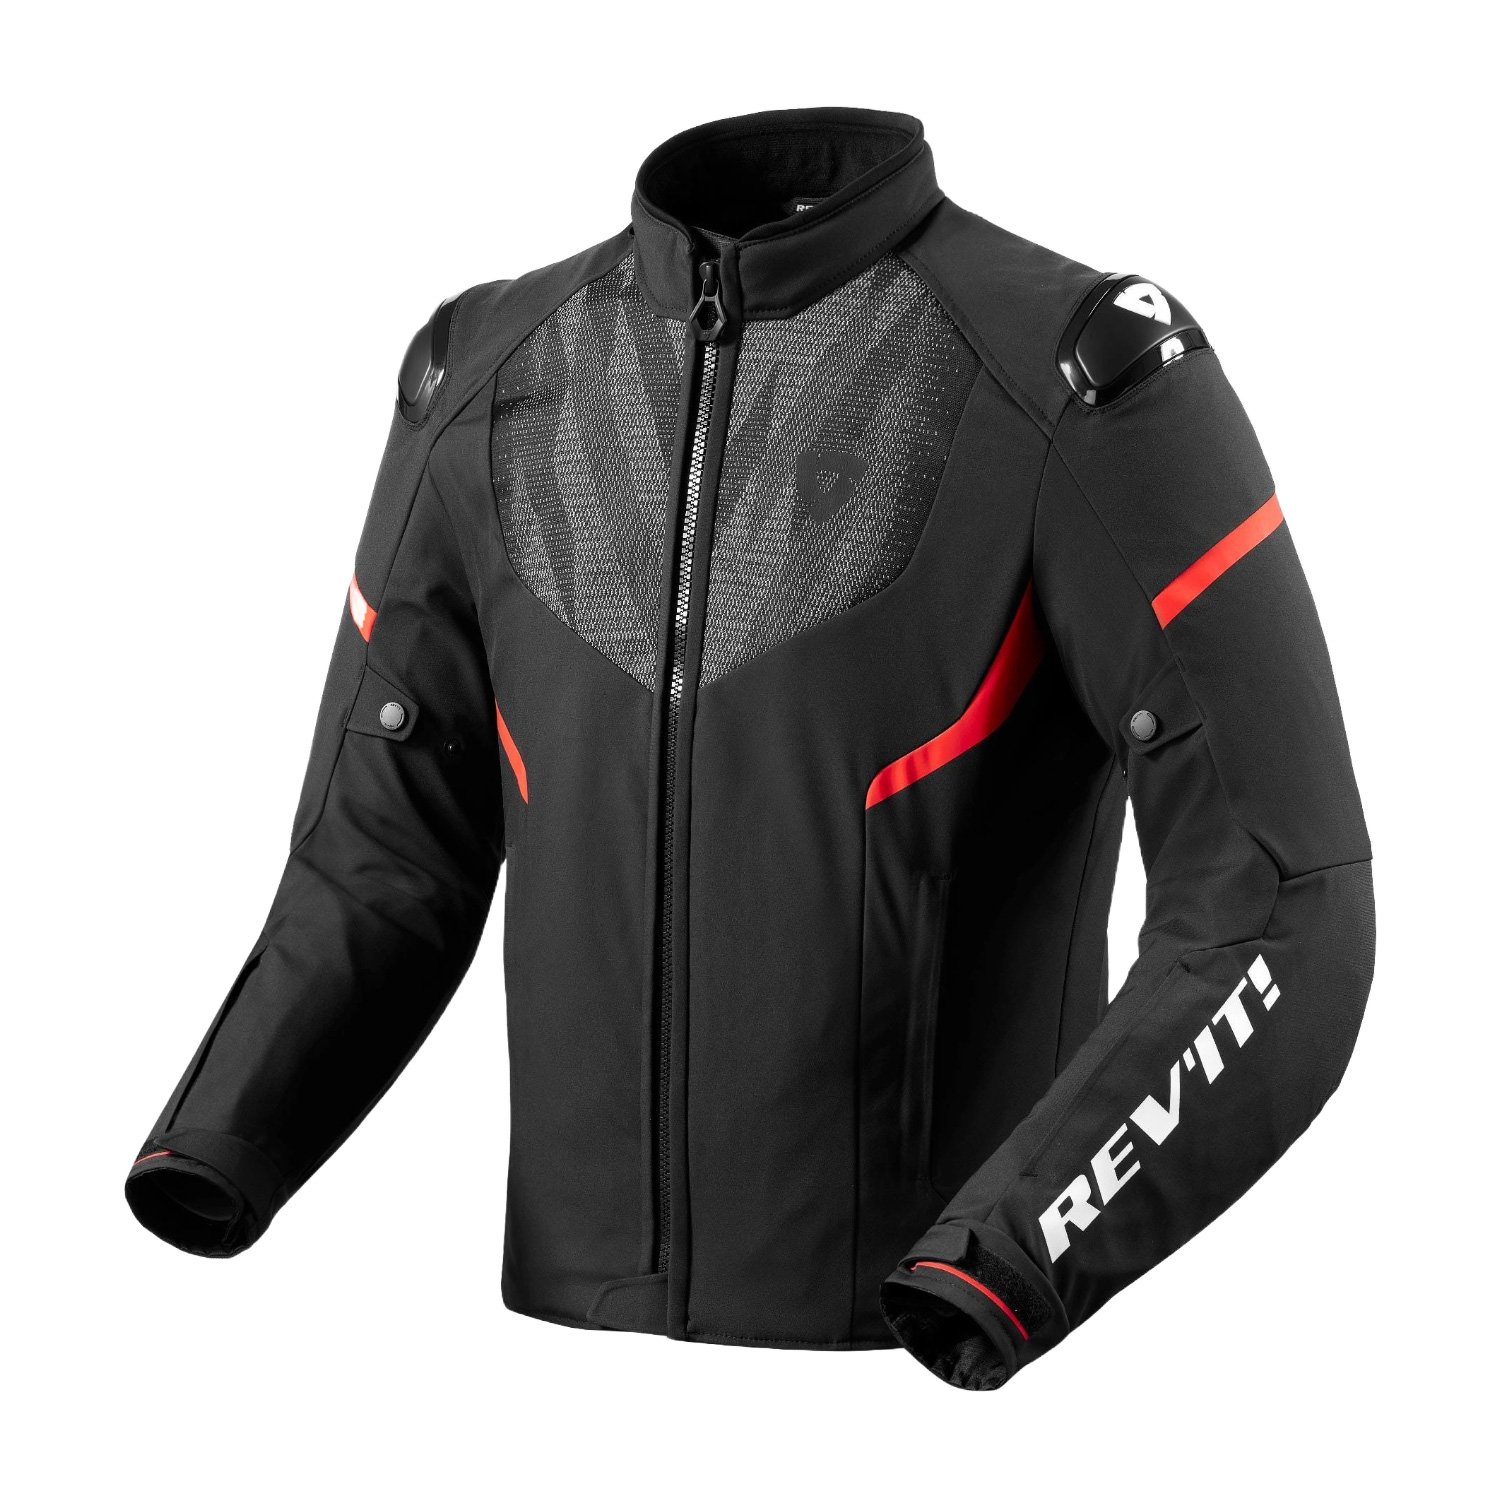 Image of REV'IT! Hyperspeed 2 H2O Jacket Black Neon Red Talla L